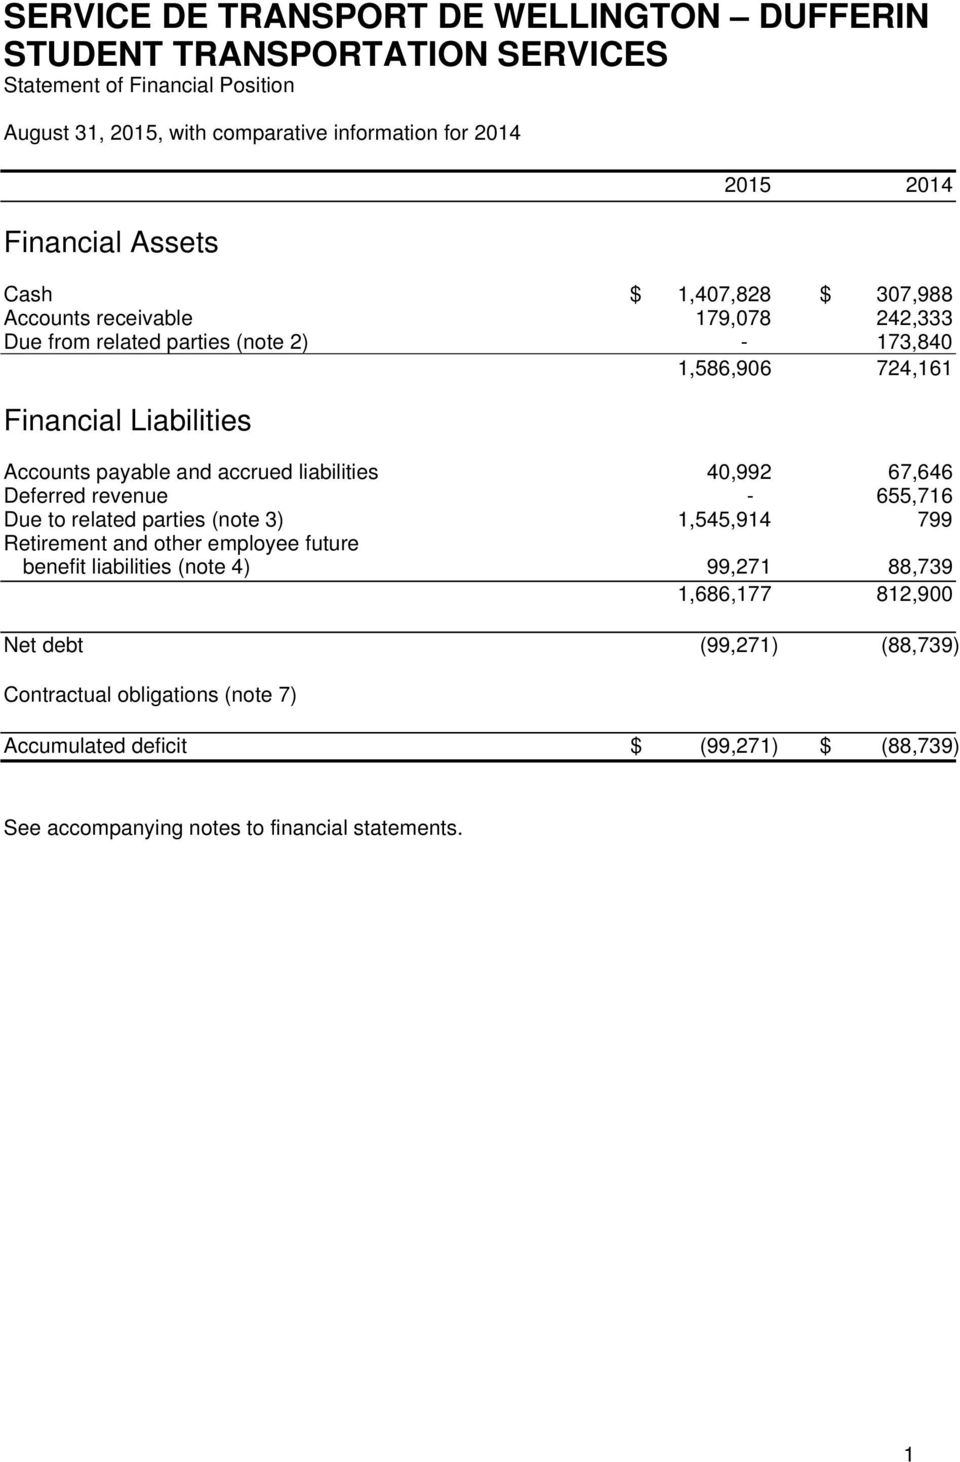 payable and accrued liabilities 40,992 67,646 Deferred revenue - 655,716 Due to related parties (note 3) 1,545,914 799 Retirement and other employee future benefit liabilities